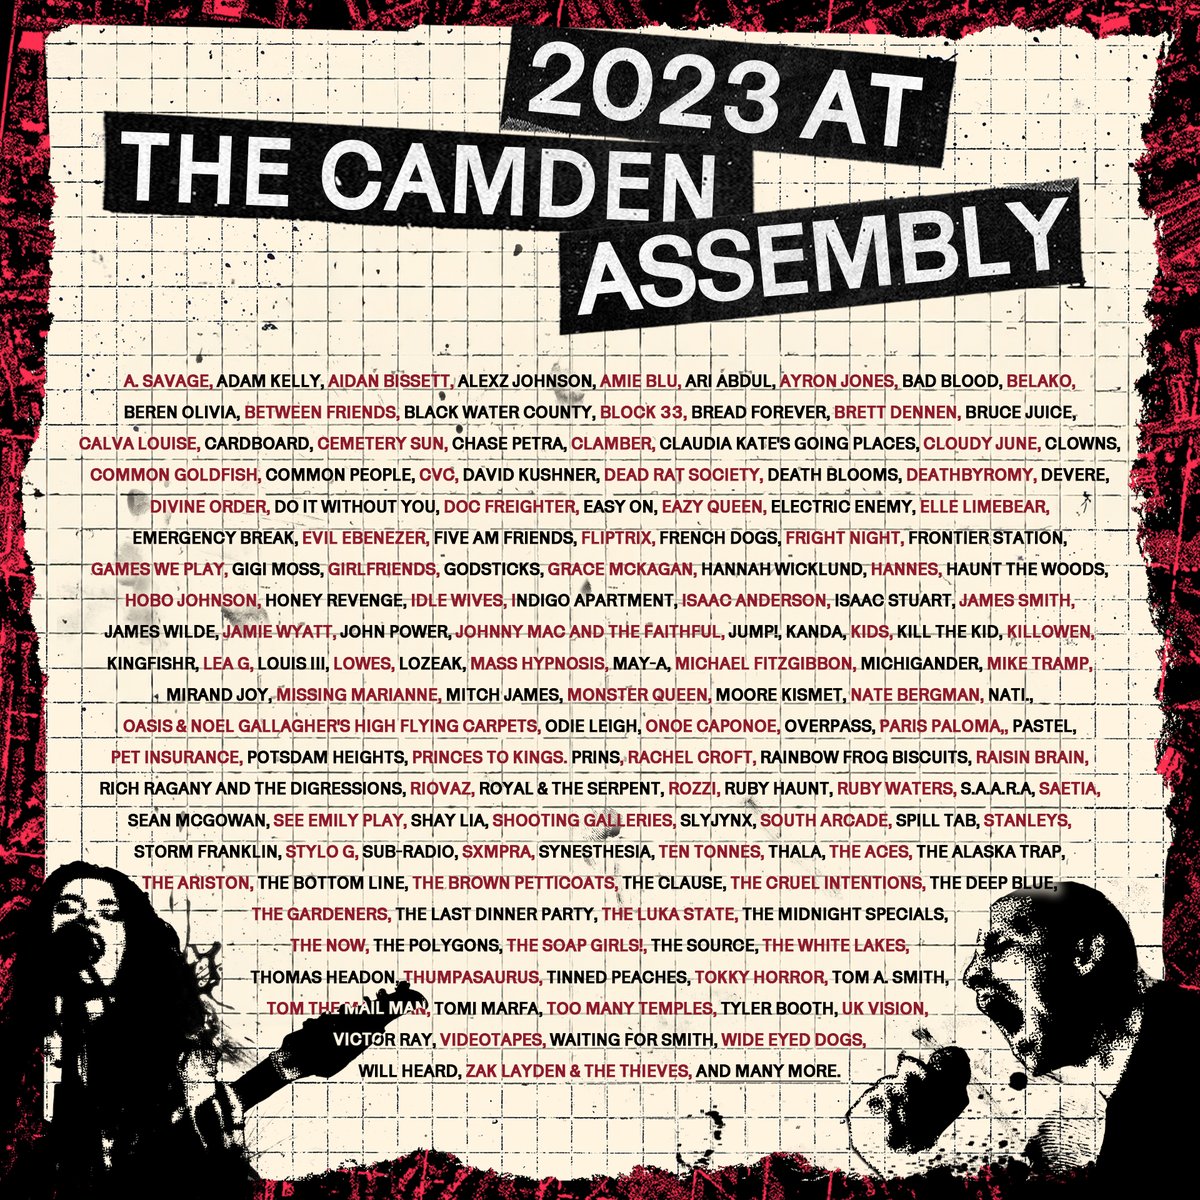 2023 was special! Thanks to all the artists for being the soundtrack to our 2023 – here's to more music and moments in 2024! 🙌🎉